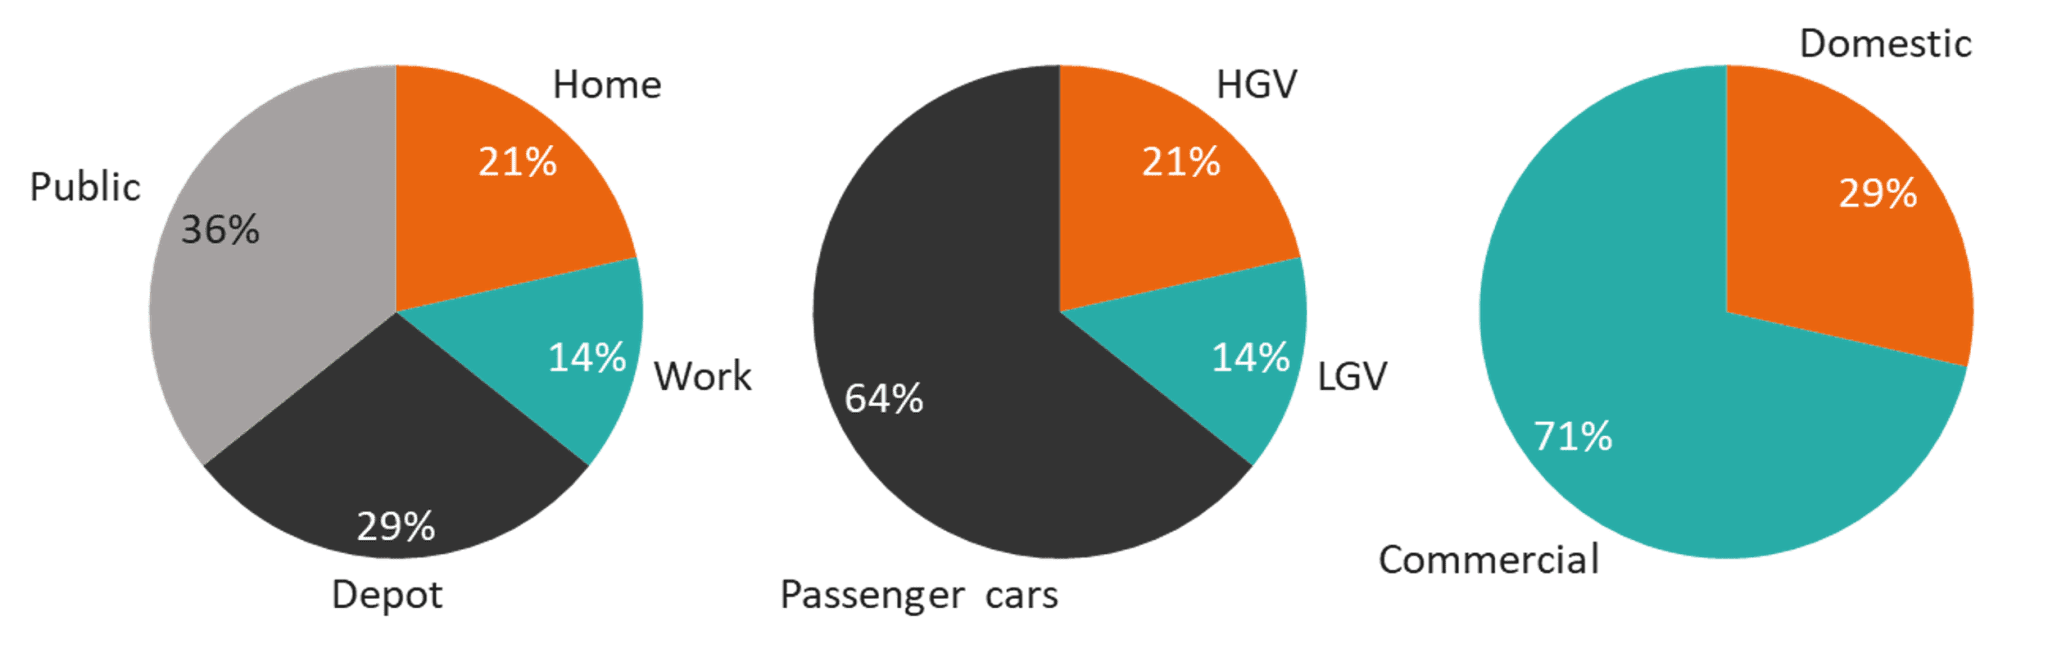 Three pie charts together horizontally. The pie chart on the left shows the percentage breakdown of trials depending on whether the charging locations were at home, work, public charge points (public) or at a depot. The pie chart in the middle shows the percentage breakdown of the identified trials in terms of vehicle type, including passenger cars, heavy goods vehicles (HGVs) and light goods vehicles (LGVs). The pie chart on the right shows the percentage breakdown of trials depending on whether they are commercial or domestic.